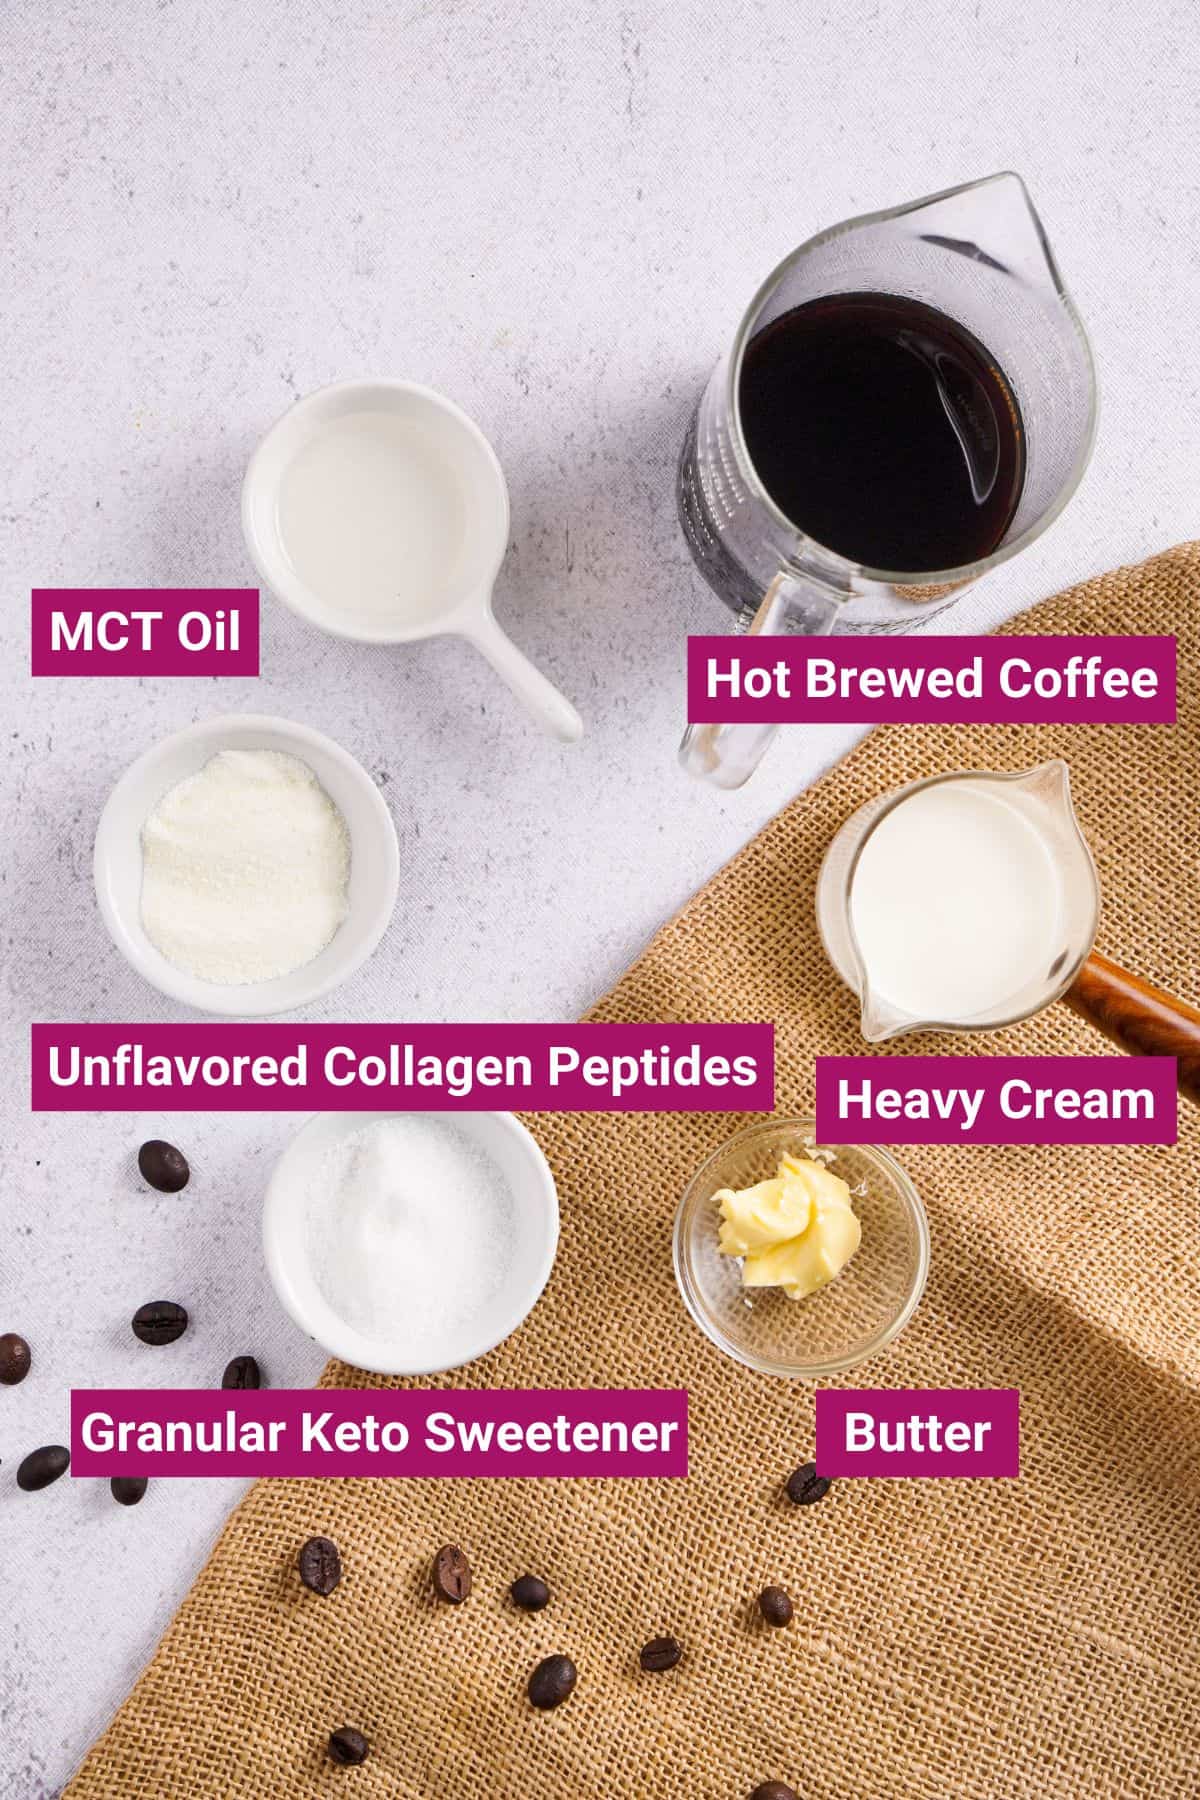 Hot brewed coffee, Unflavored Collagen Peptides, MCT Oil, Unsalted butter, melted Heavy cream, Granular keto sweetener on separate bowls and glass